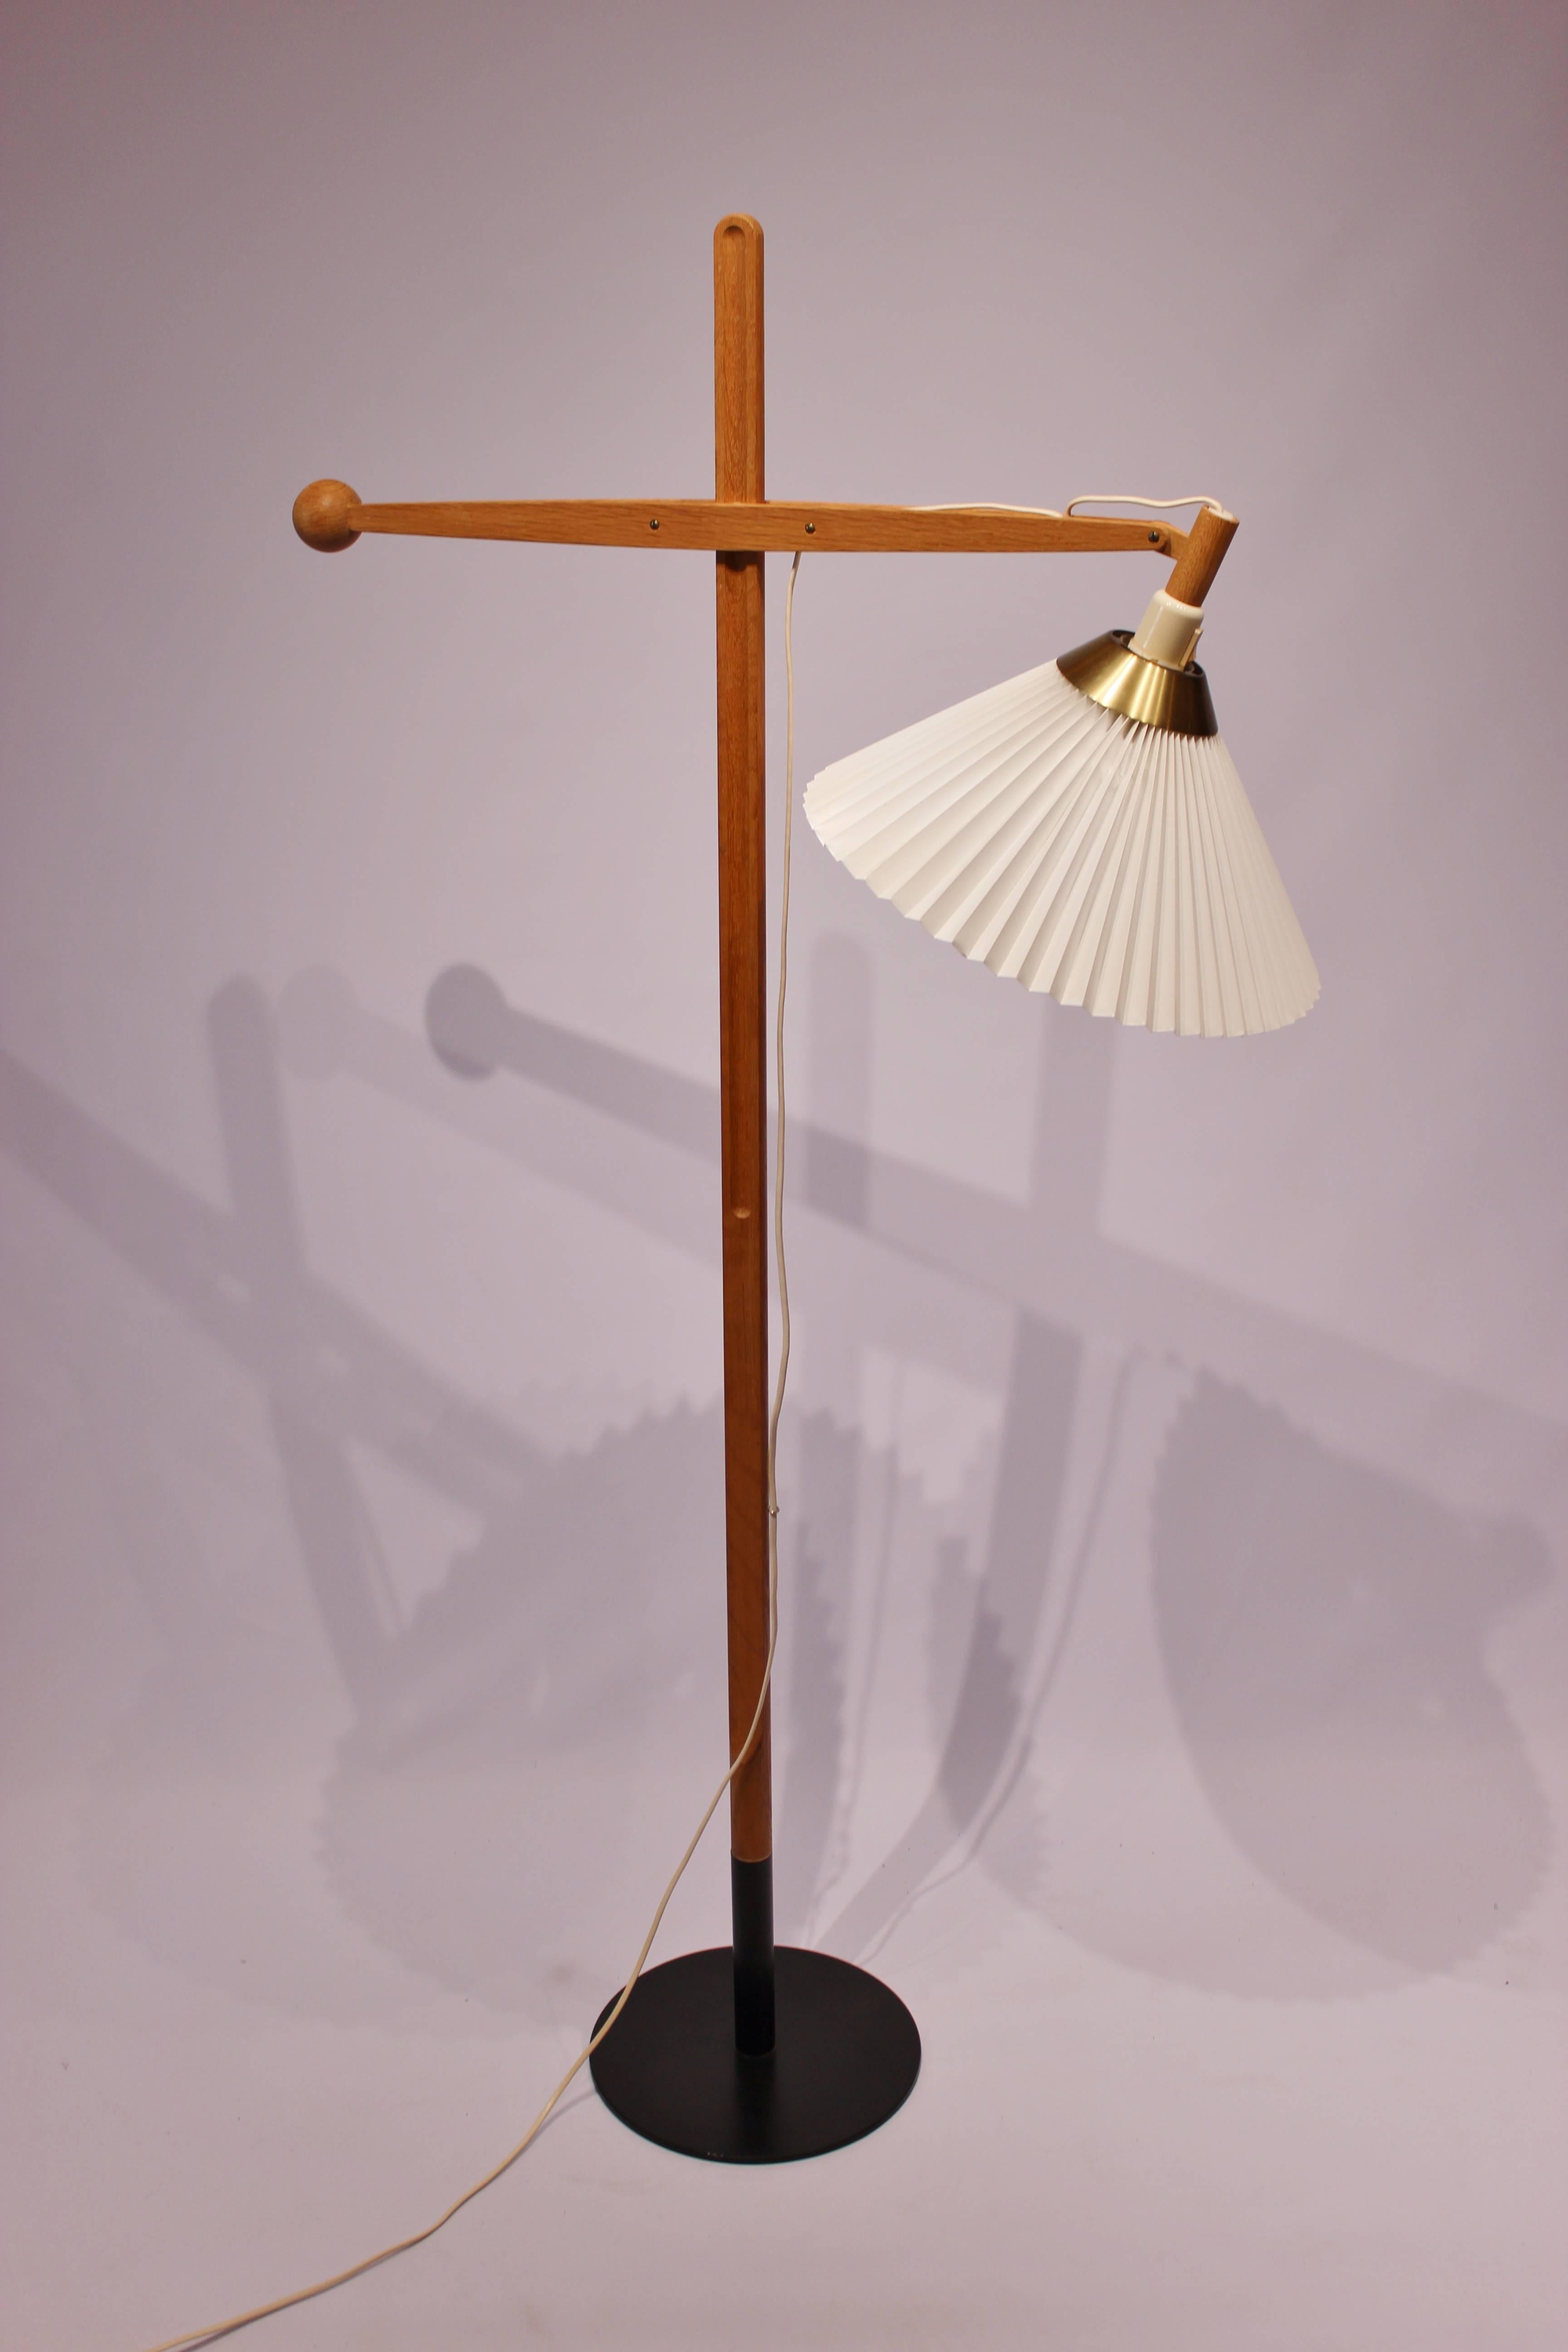 Floor lamp, model 325, in oak designed by Vilhelm Wohlert for Le Klint. The lamp is in great vintage condition and from the 1960s.